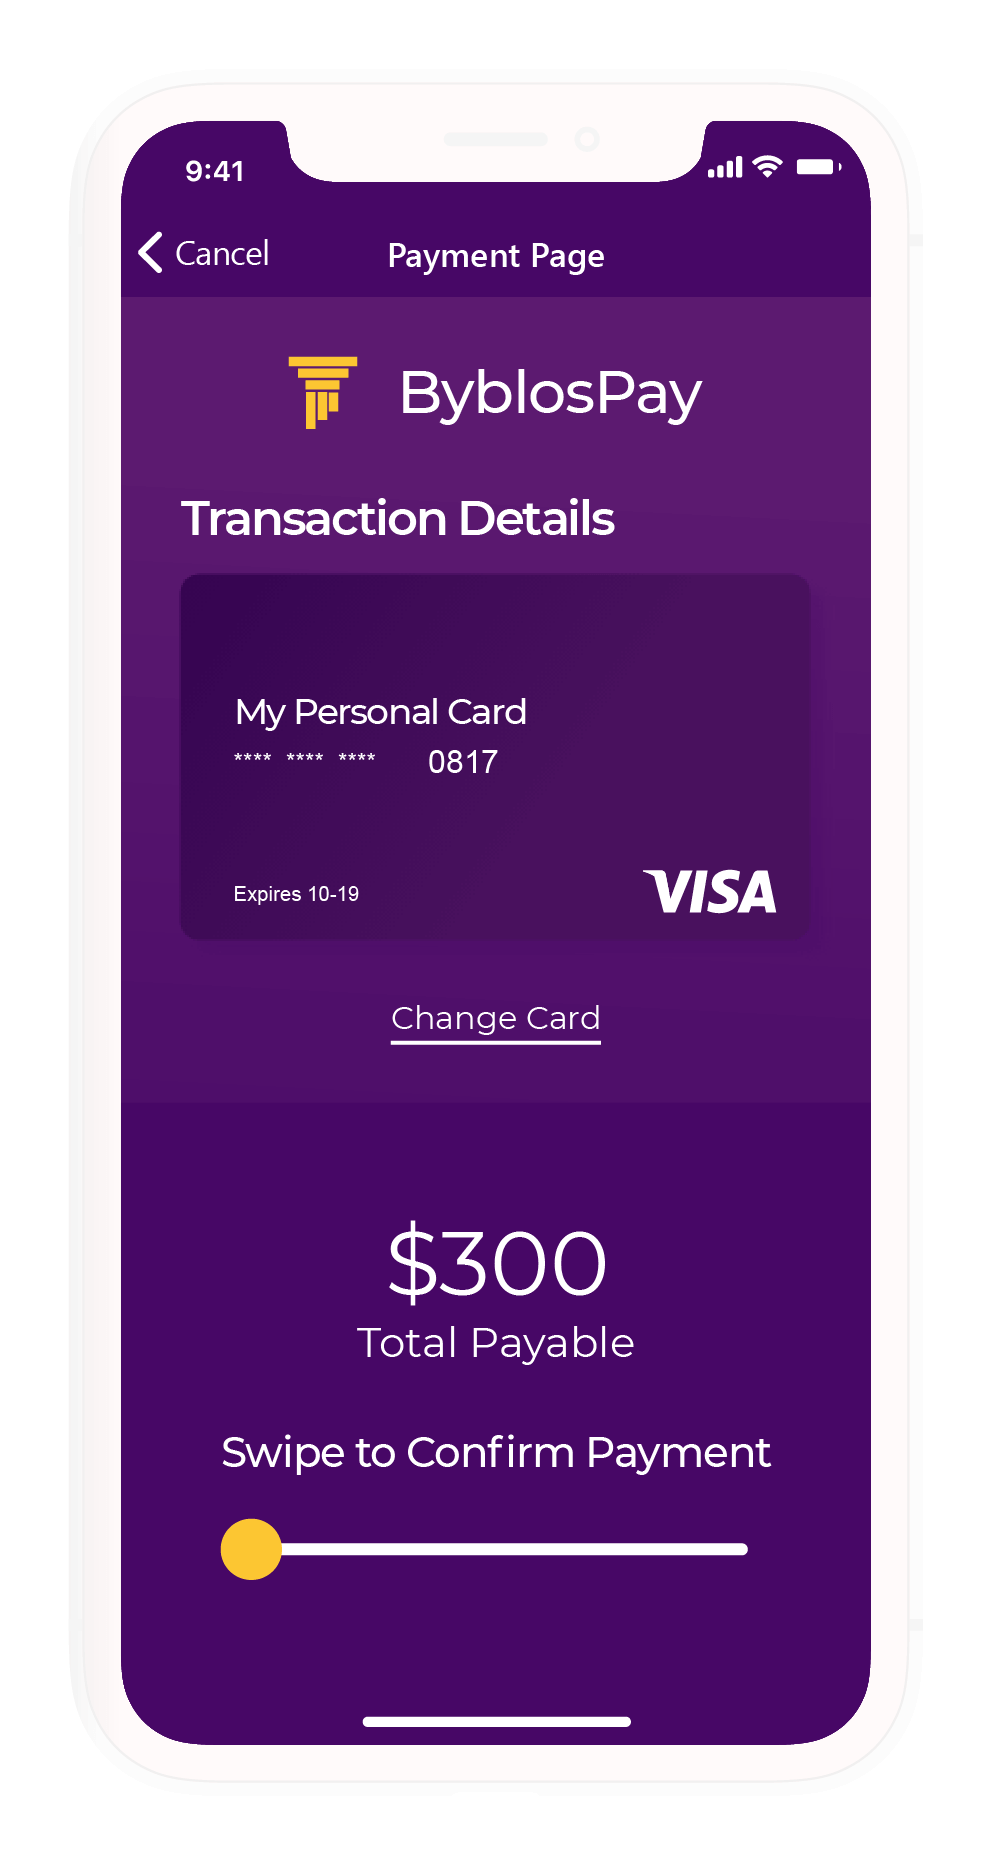 The UI design of the payment confirmation screen showing the slider element that is used to swipe-confirm a transaction